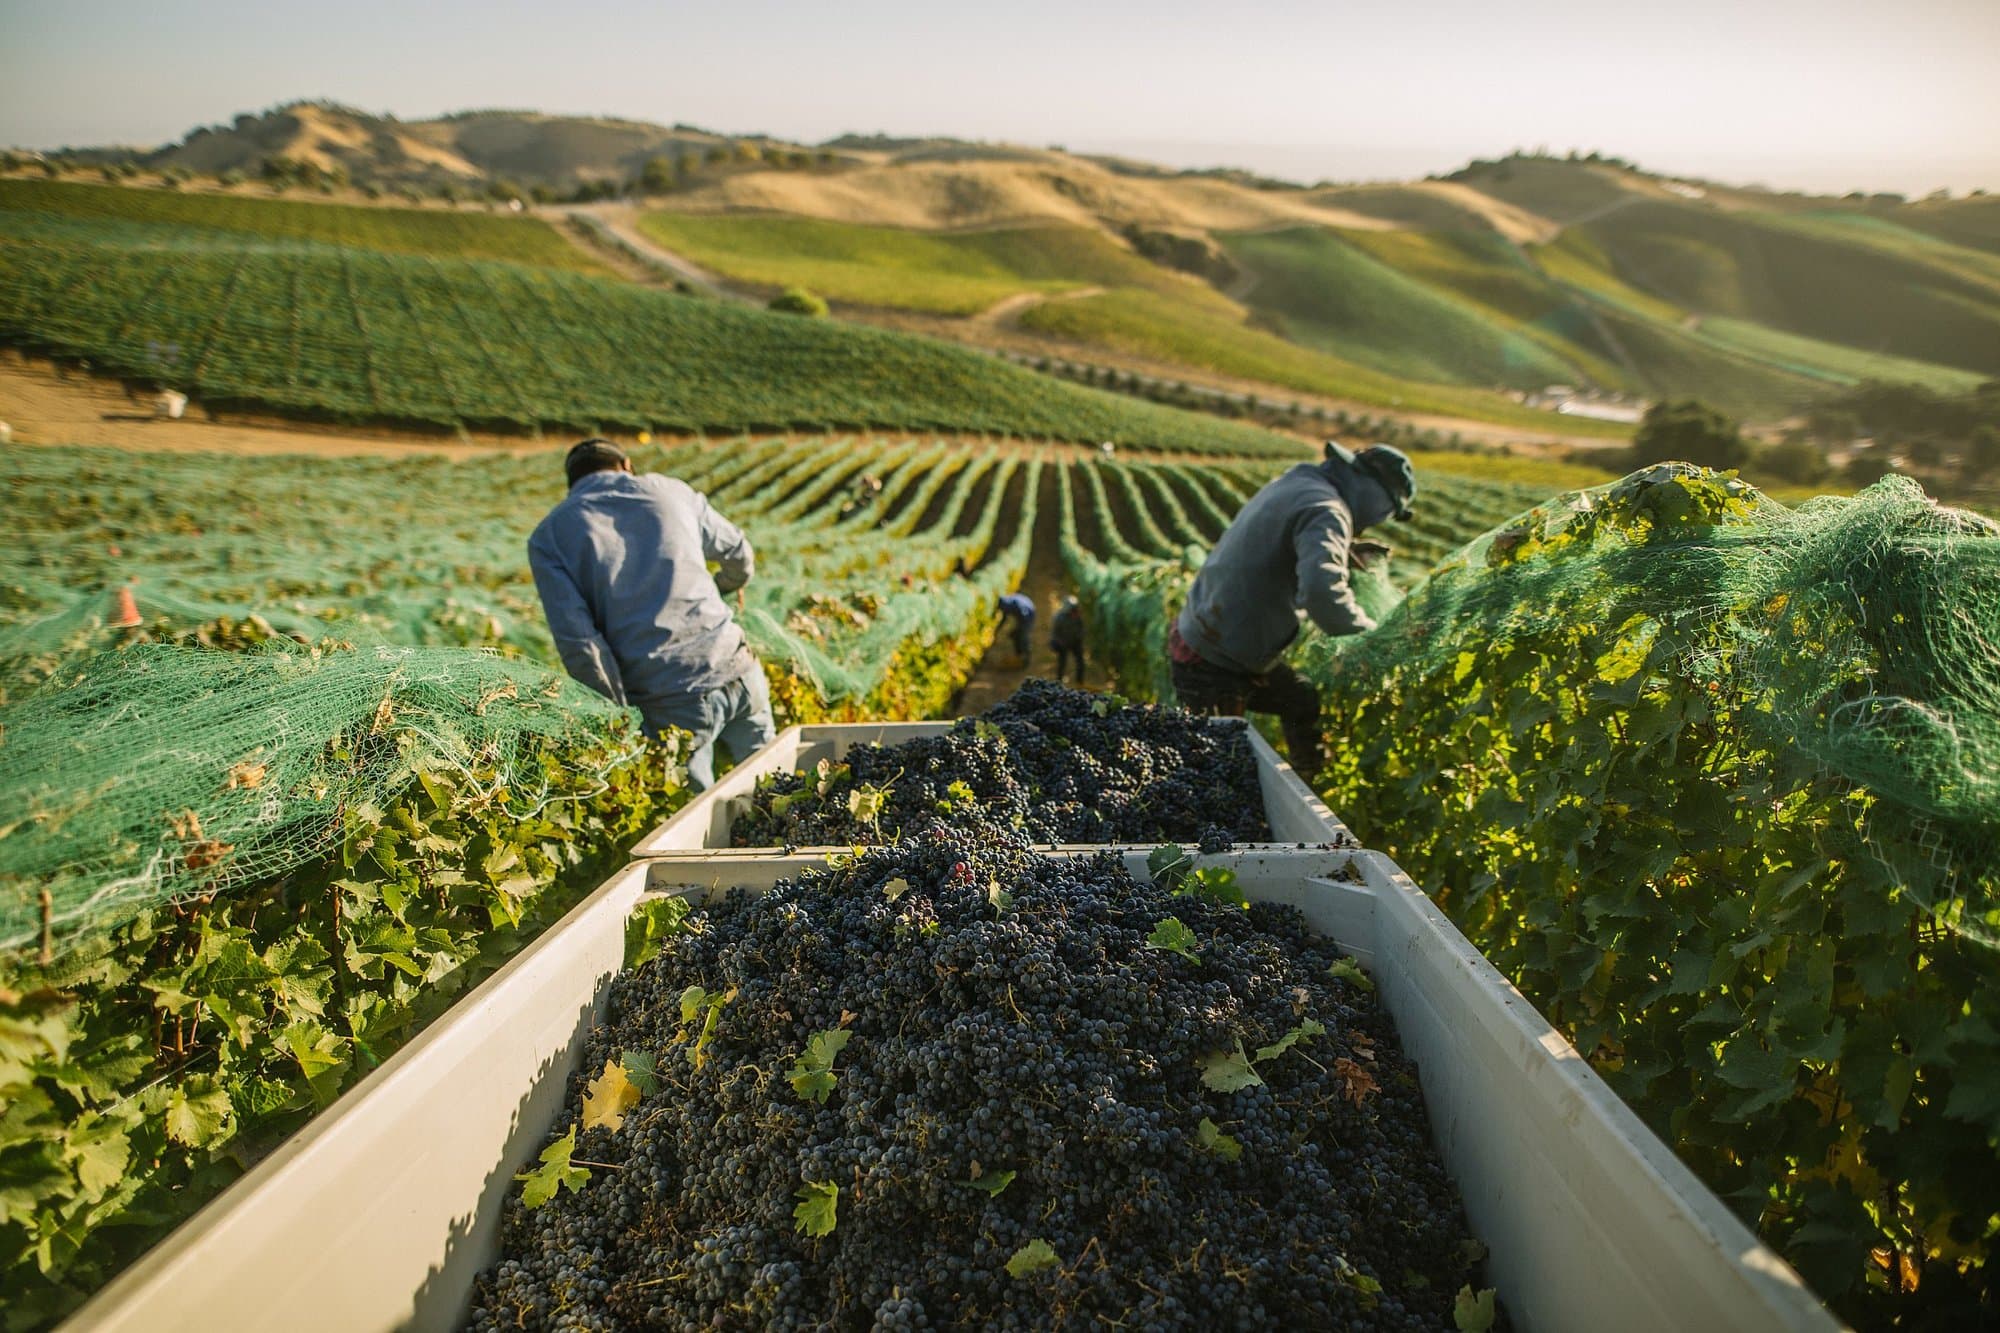 Two workers harvesting grapes on the vineyard